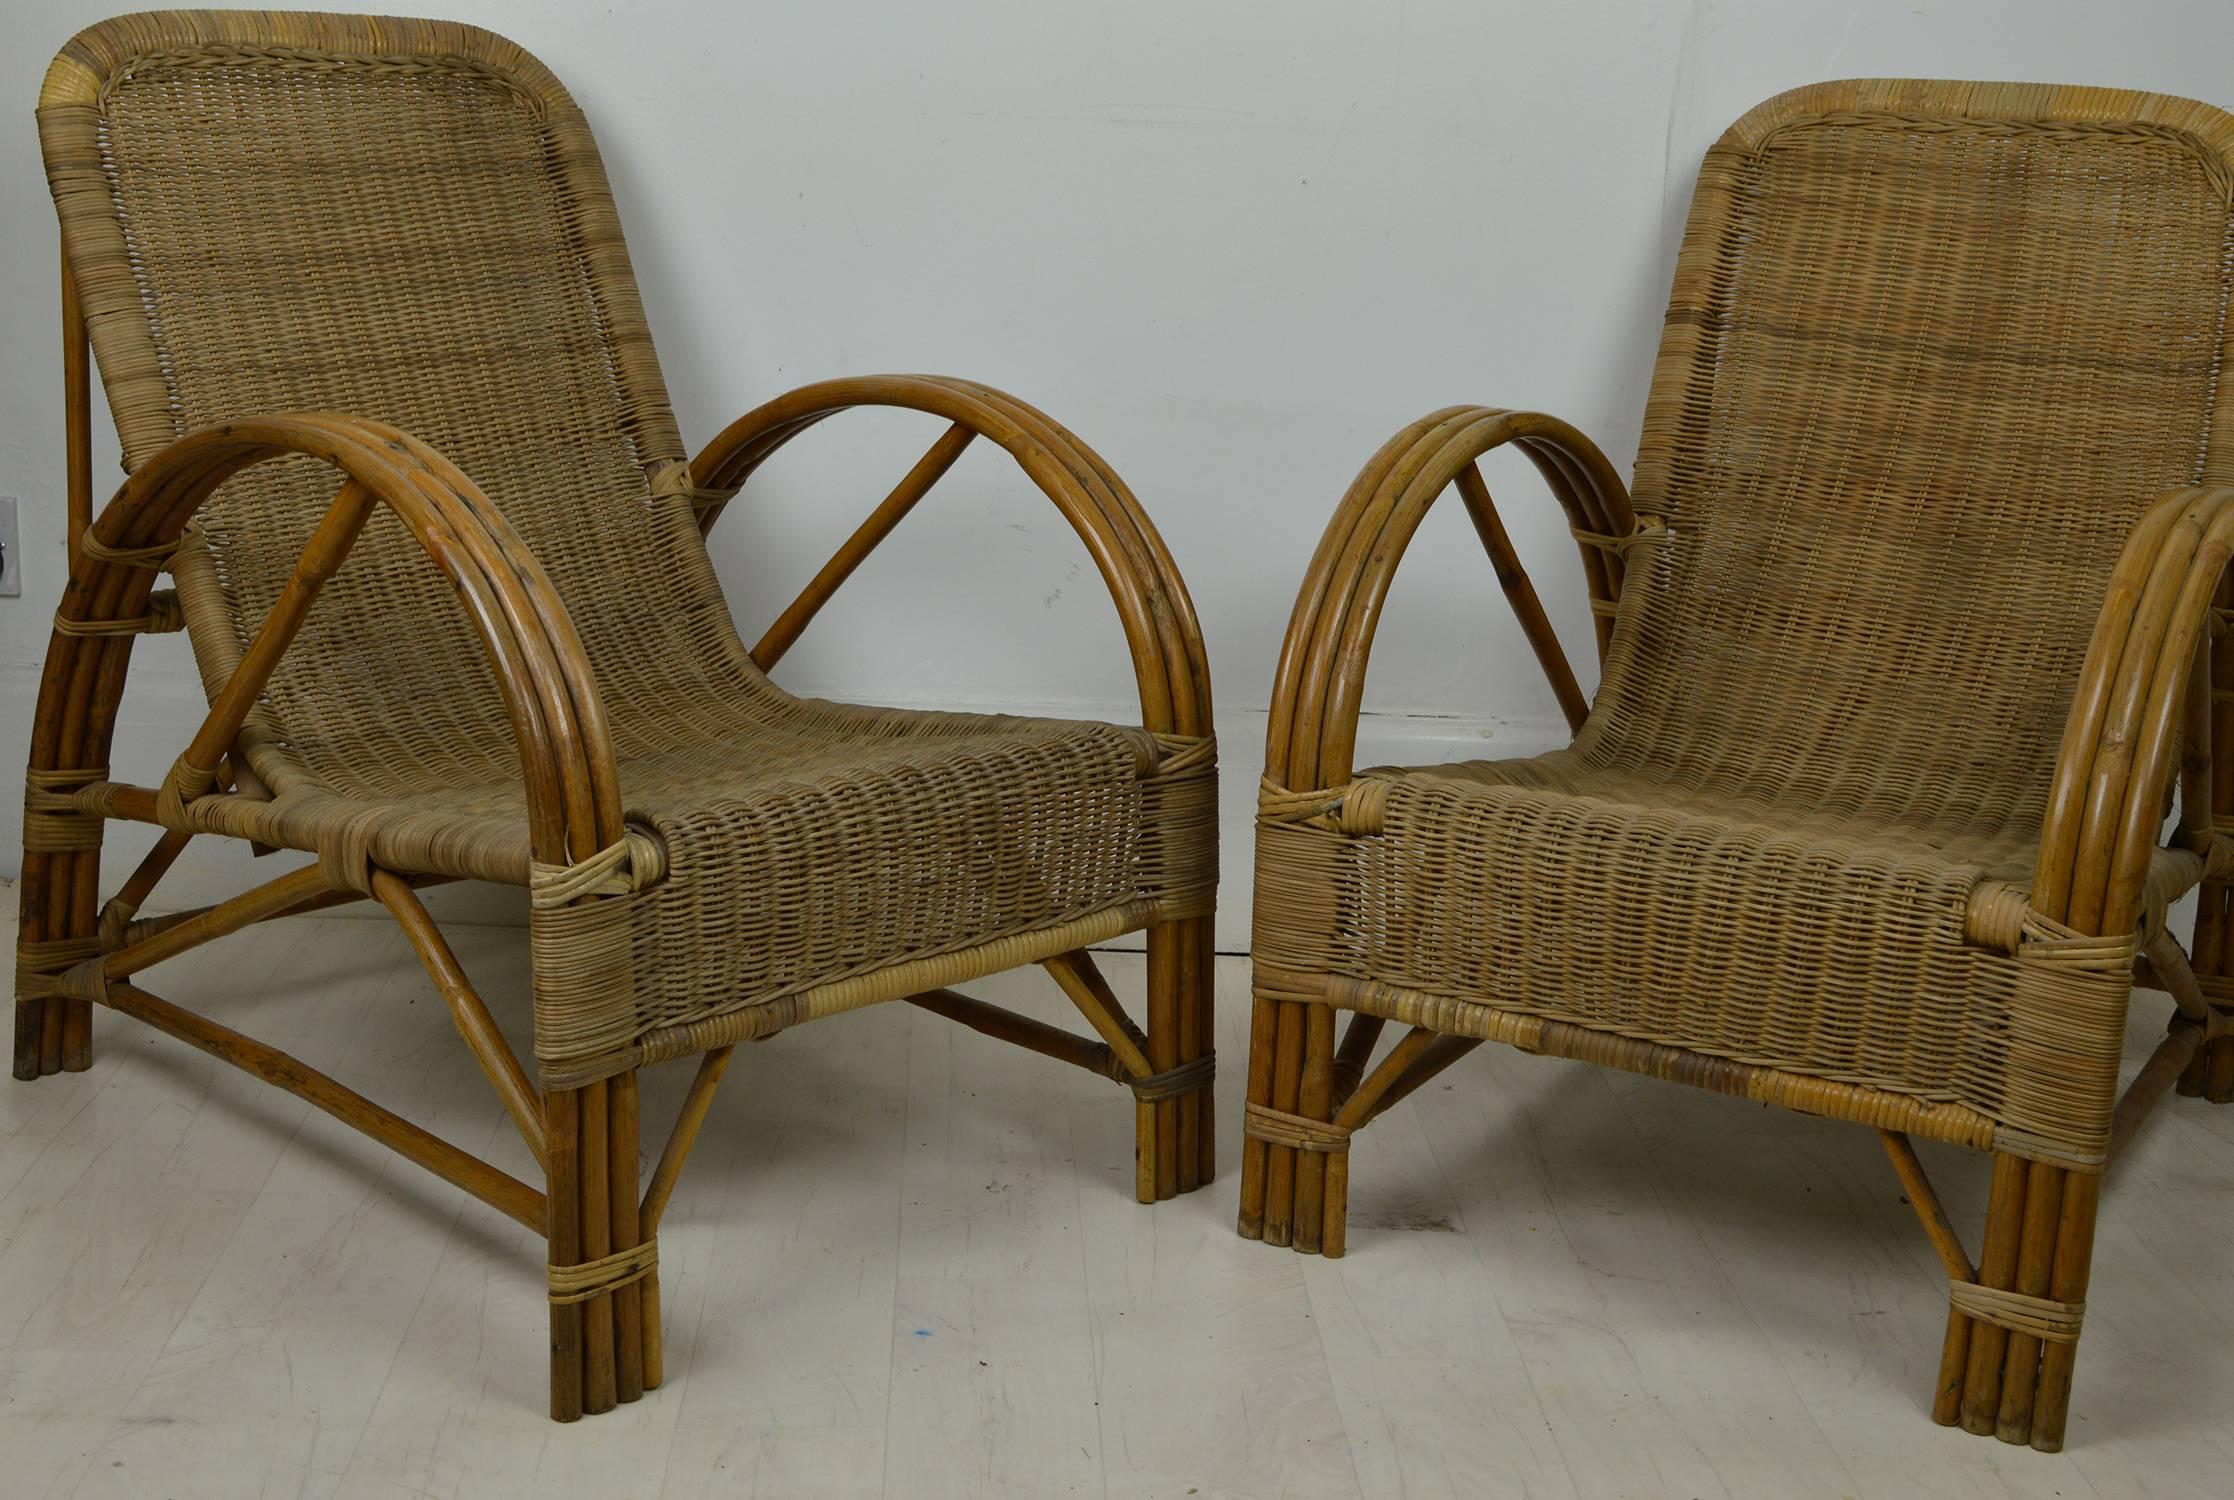 Pair of Vintage Midcentury Bamboo and Rattan Chairs 1